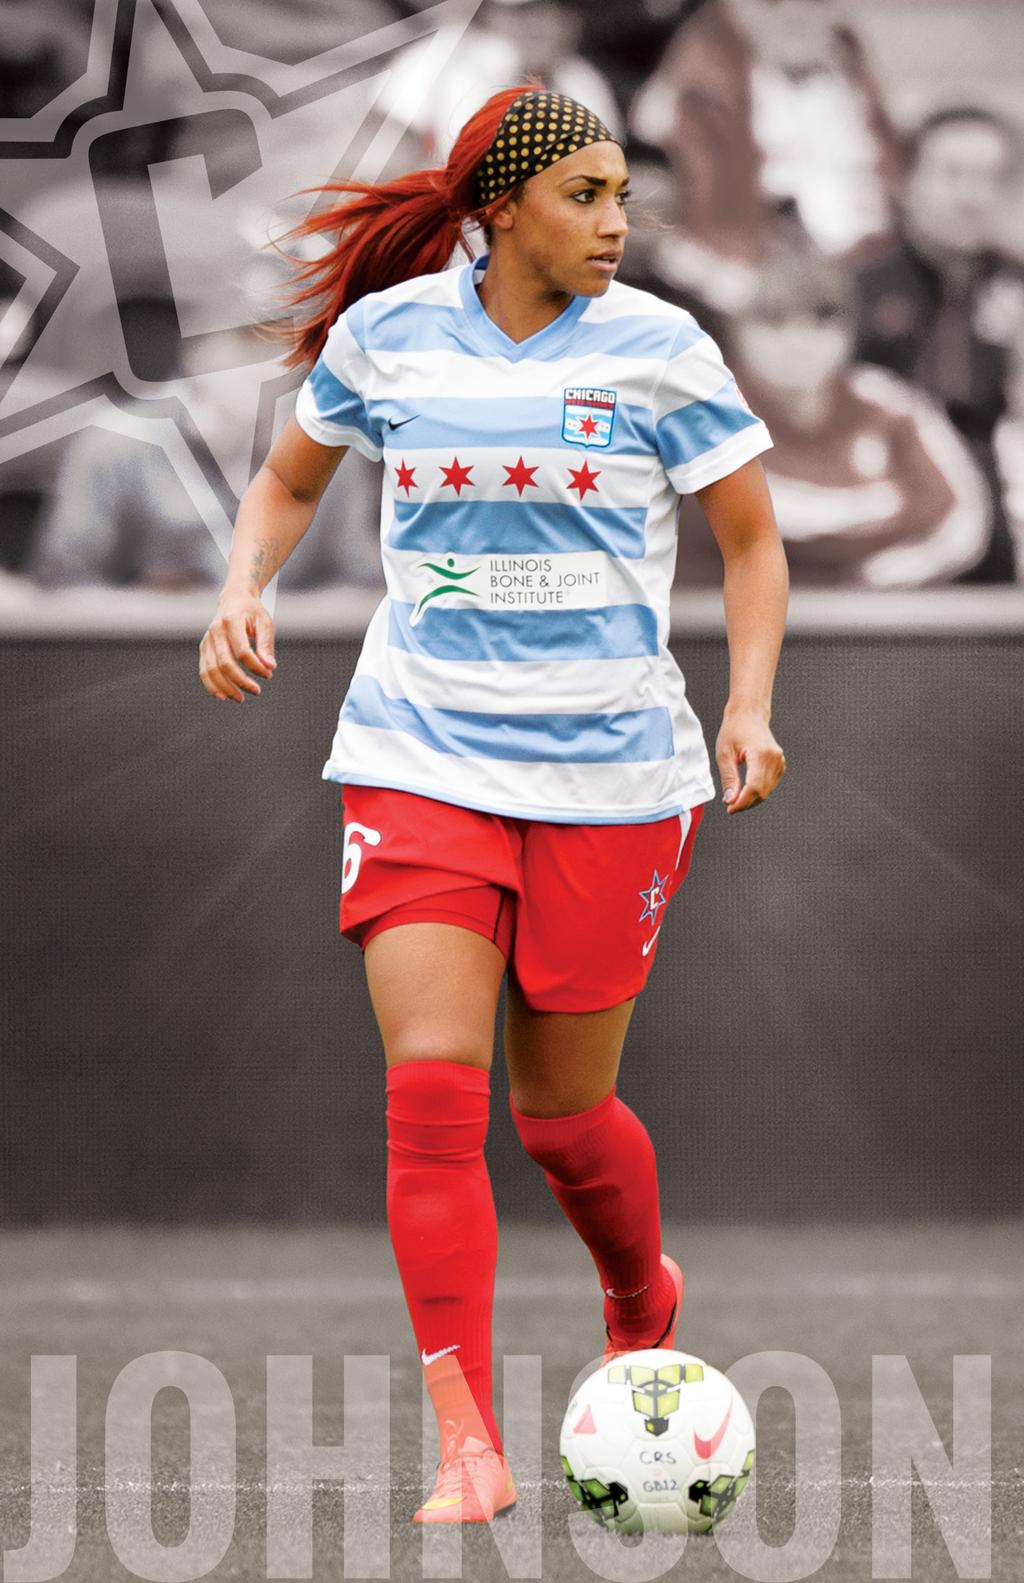 16Samantha Johnson POSITION: DEFENDER HEIGHT: 5-6 BORN: JUNE 10, 1991 HOMETOWN: PALMDALE, CA COLLEGE: UNIV. OF SOUTHERN CALIFORNIA INTERNATIONAL: 2010-2009: Member of the U-18 and U-20 U.S. Women s National Team 2008: Member of the U.